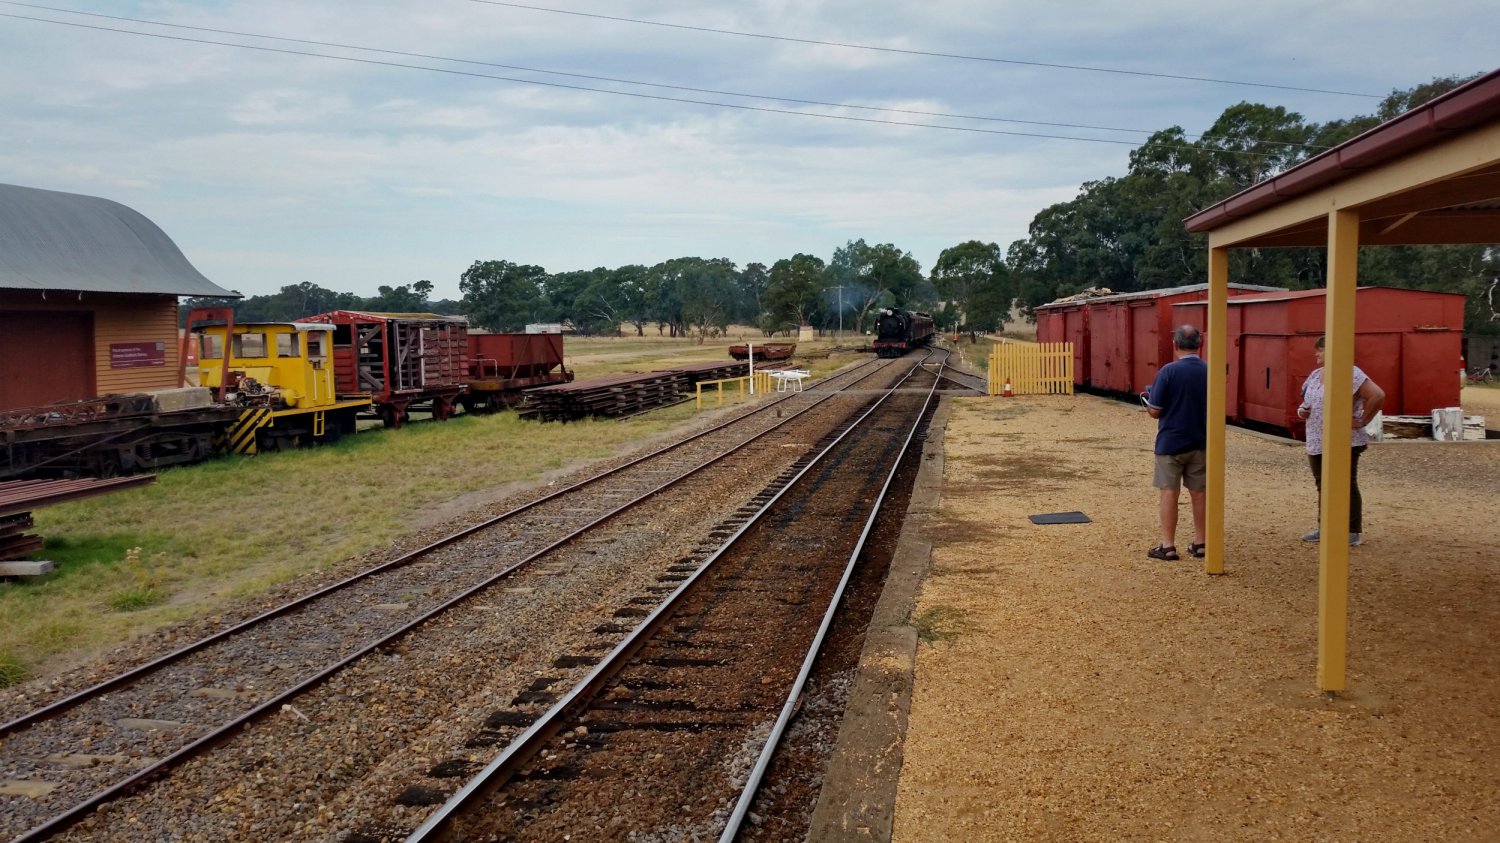 Train watching at Muckleford. Castlemaine to Maldon rail trail ride. April 2018.